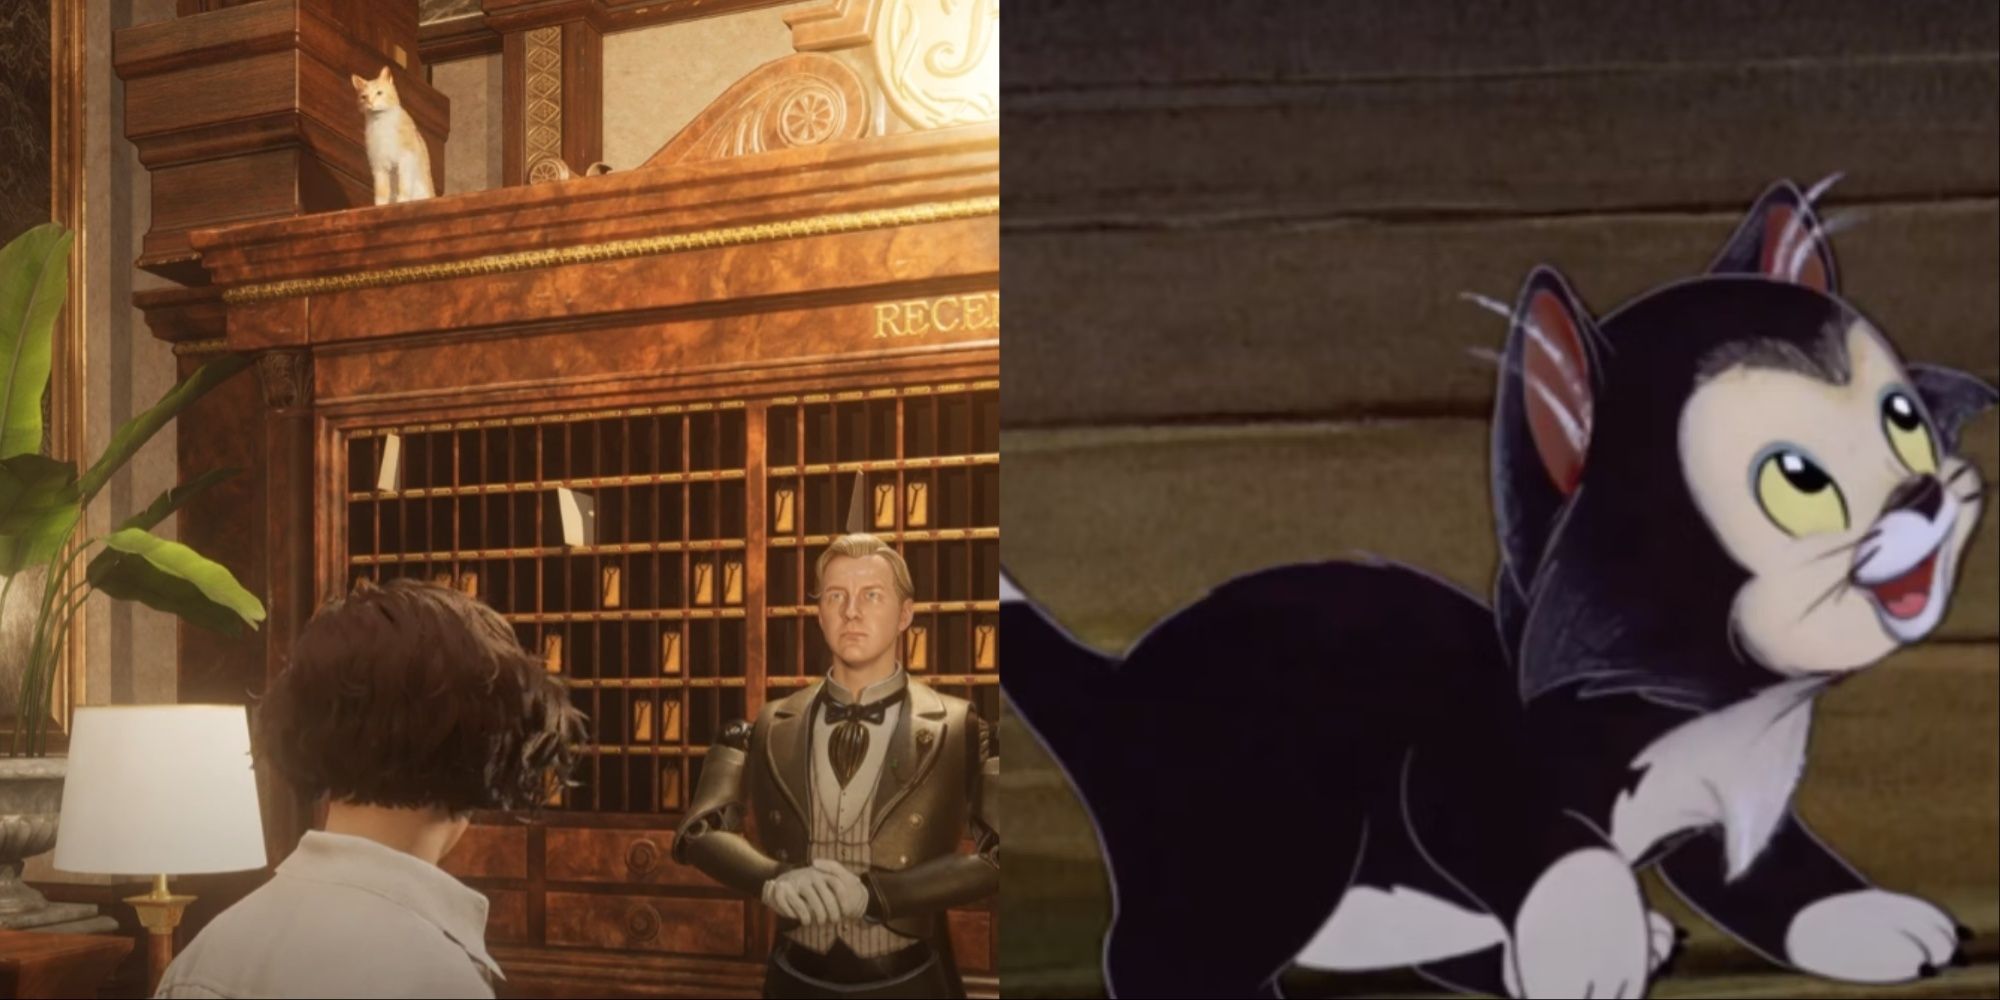 Split-image of Spring the cat on a reception cabinet behind Polendina, and Figaro from the animated Disney Pinocchio film.